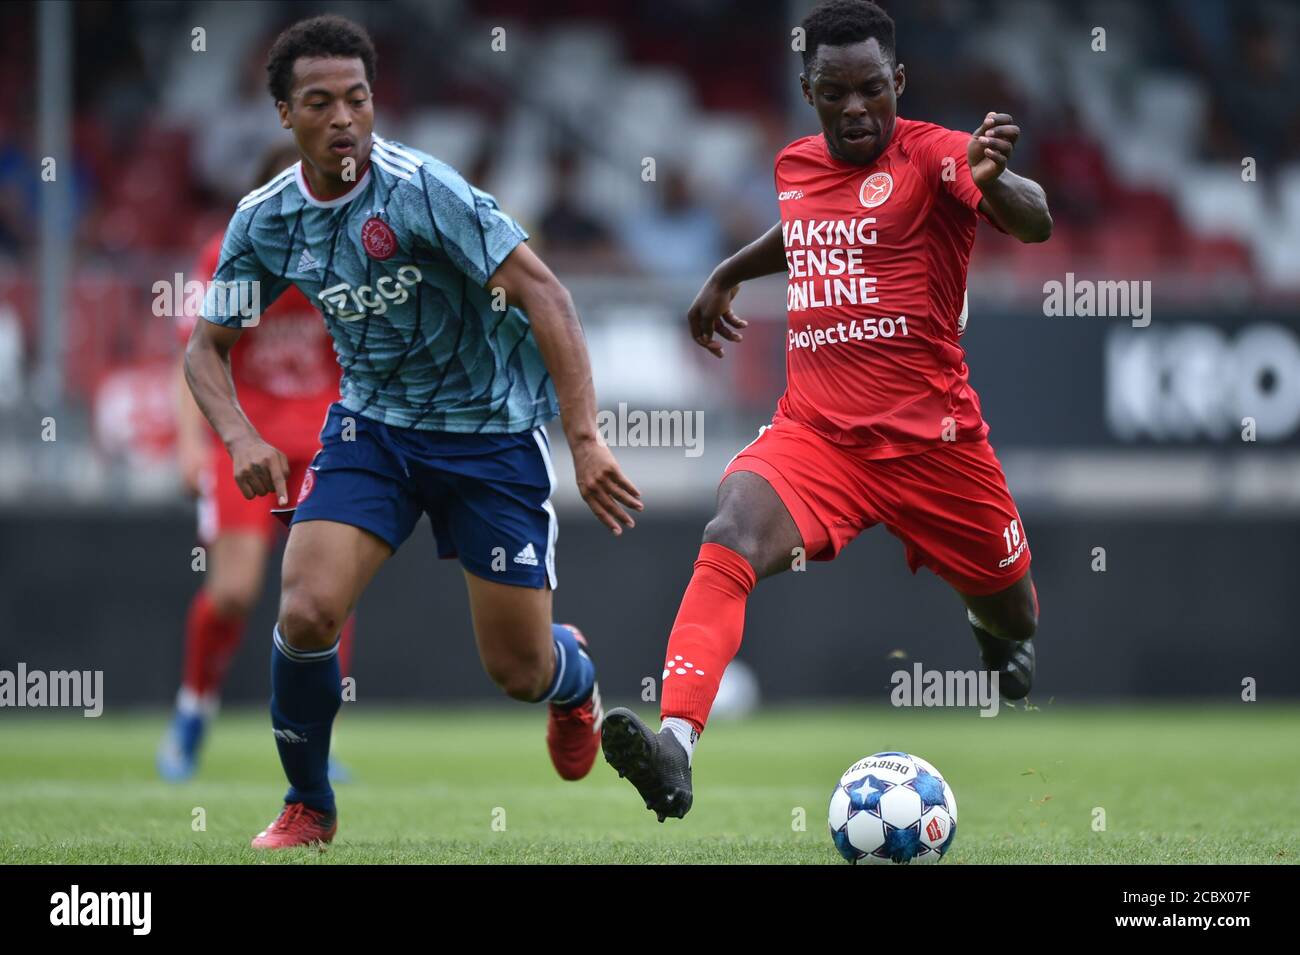 ALMERE, NETHERLANDS - AUGUST 1: Nourdin Musampa of Jong Ajax, Jearl  Margaritha of Almere City FC seen during the pre season match Almere City  FC v Jong Ajax on August 1, 2020